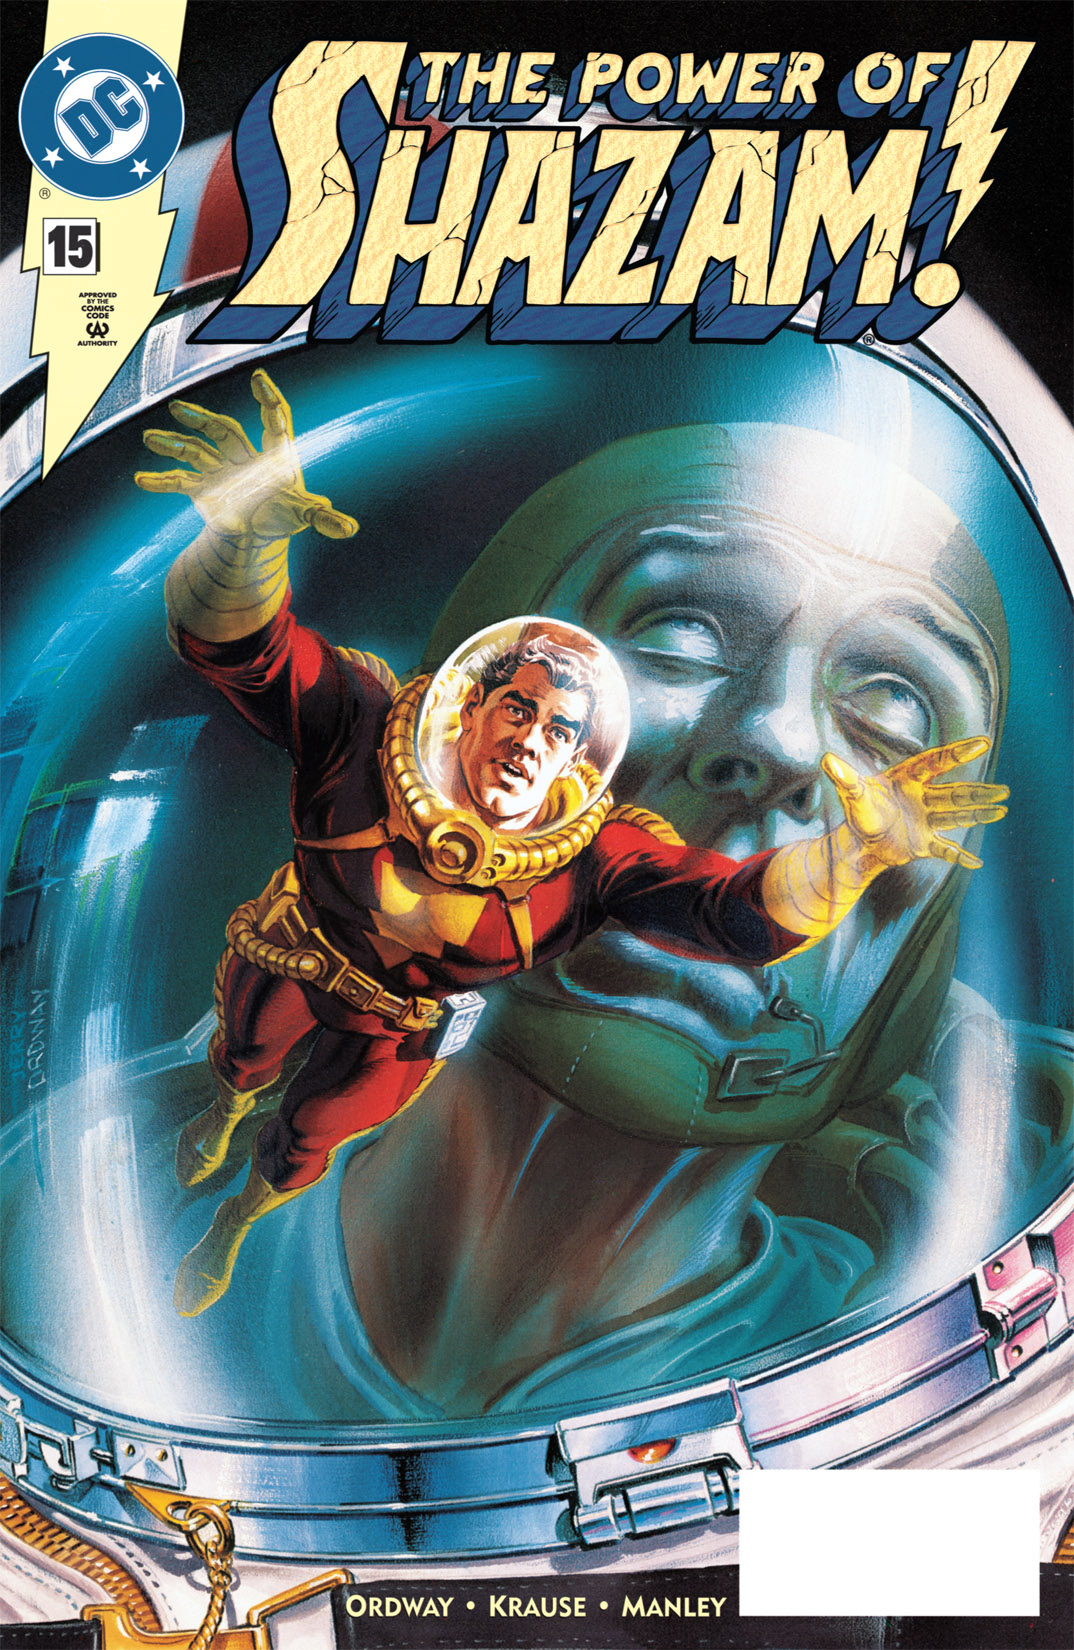 Read online The Power of SHAZAM! comic -  Issue #15 - 1